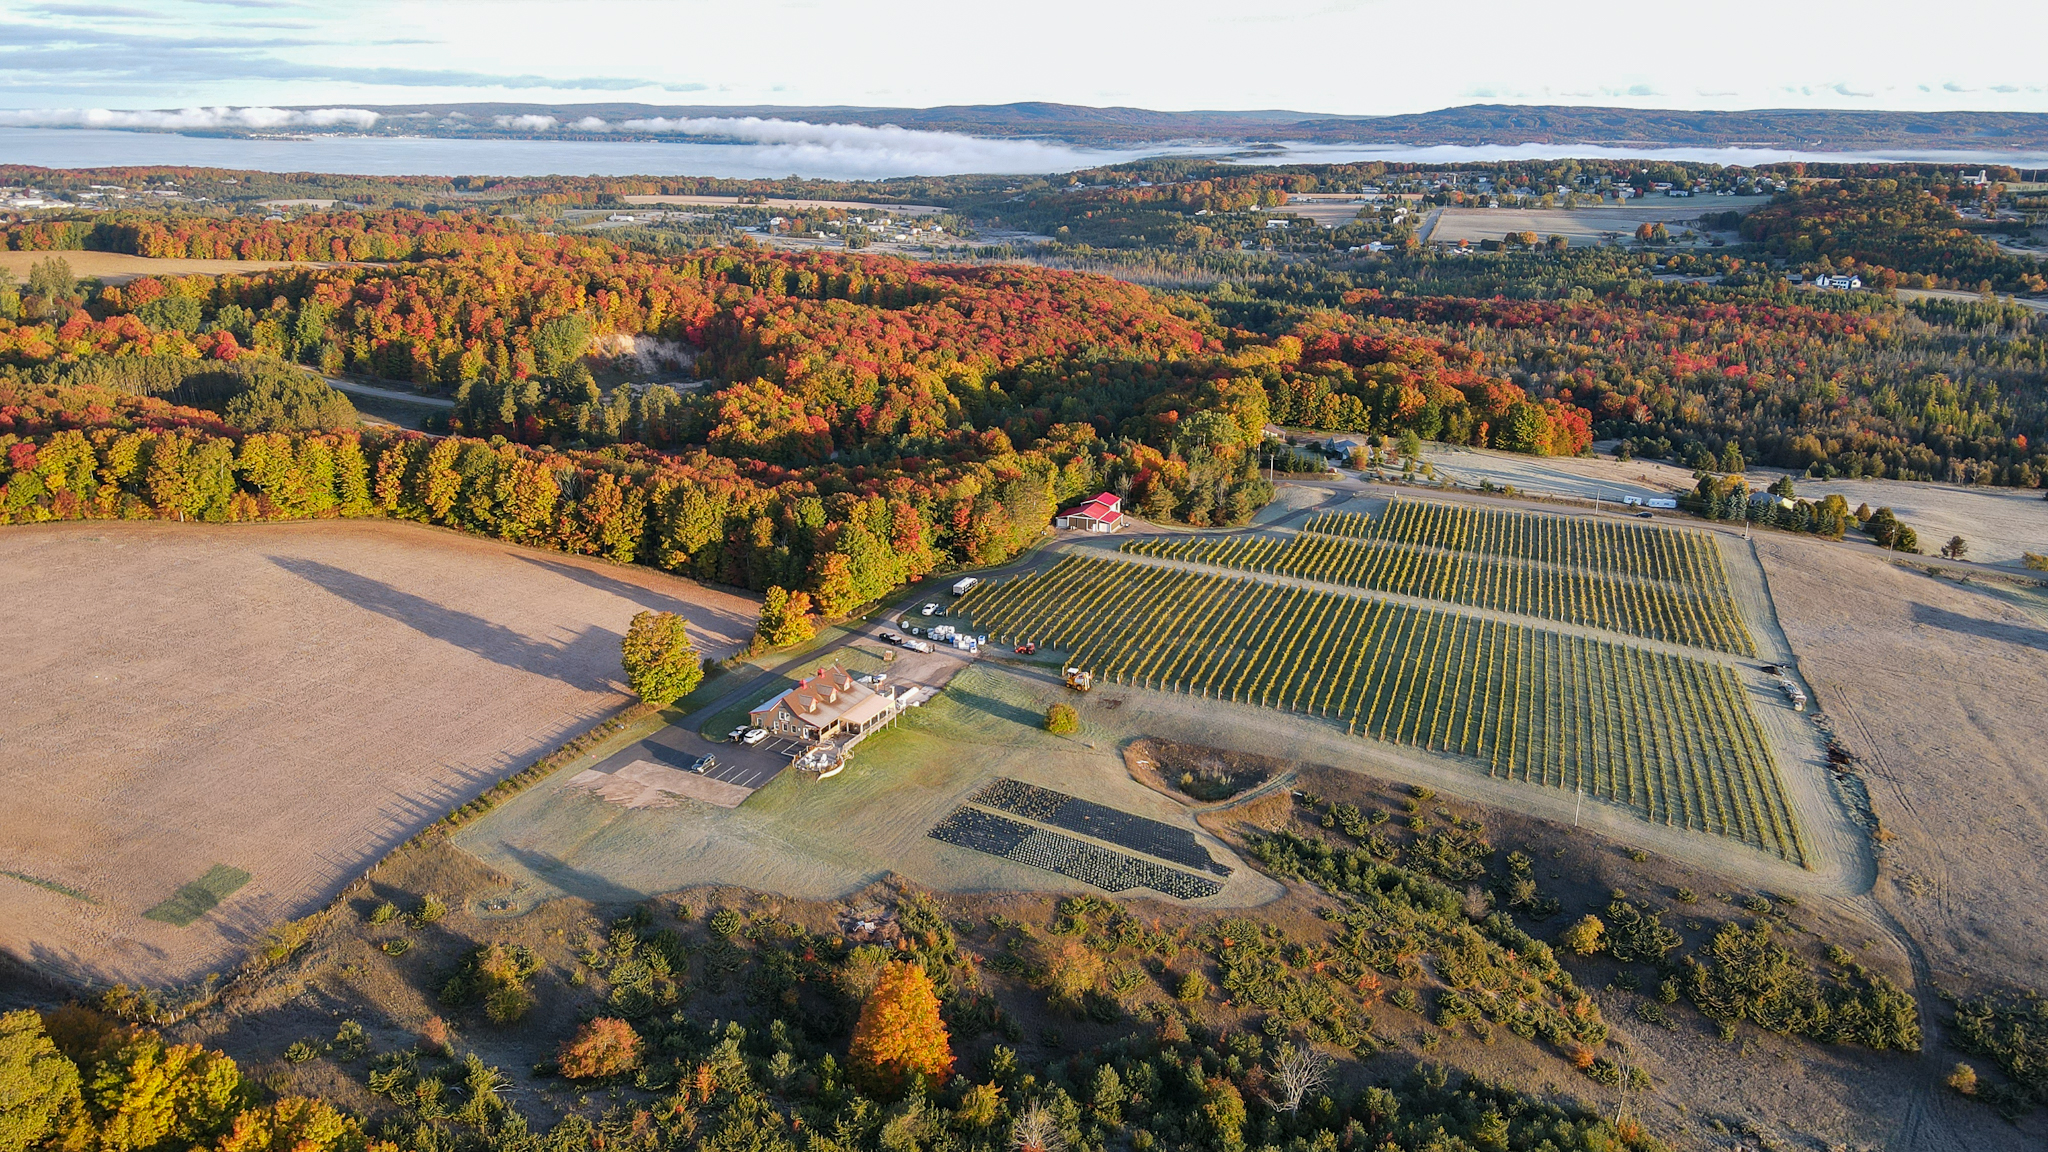 A drone picture of the winery and vineyard in the fall.